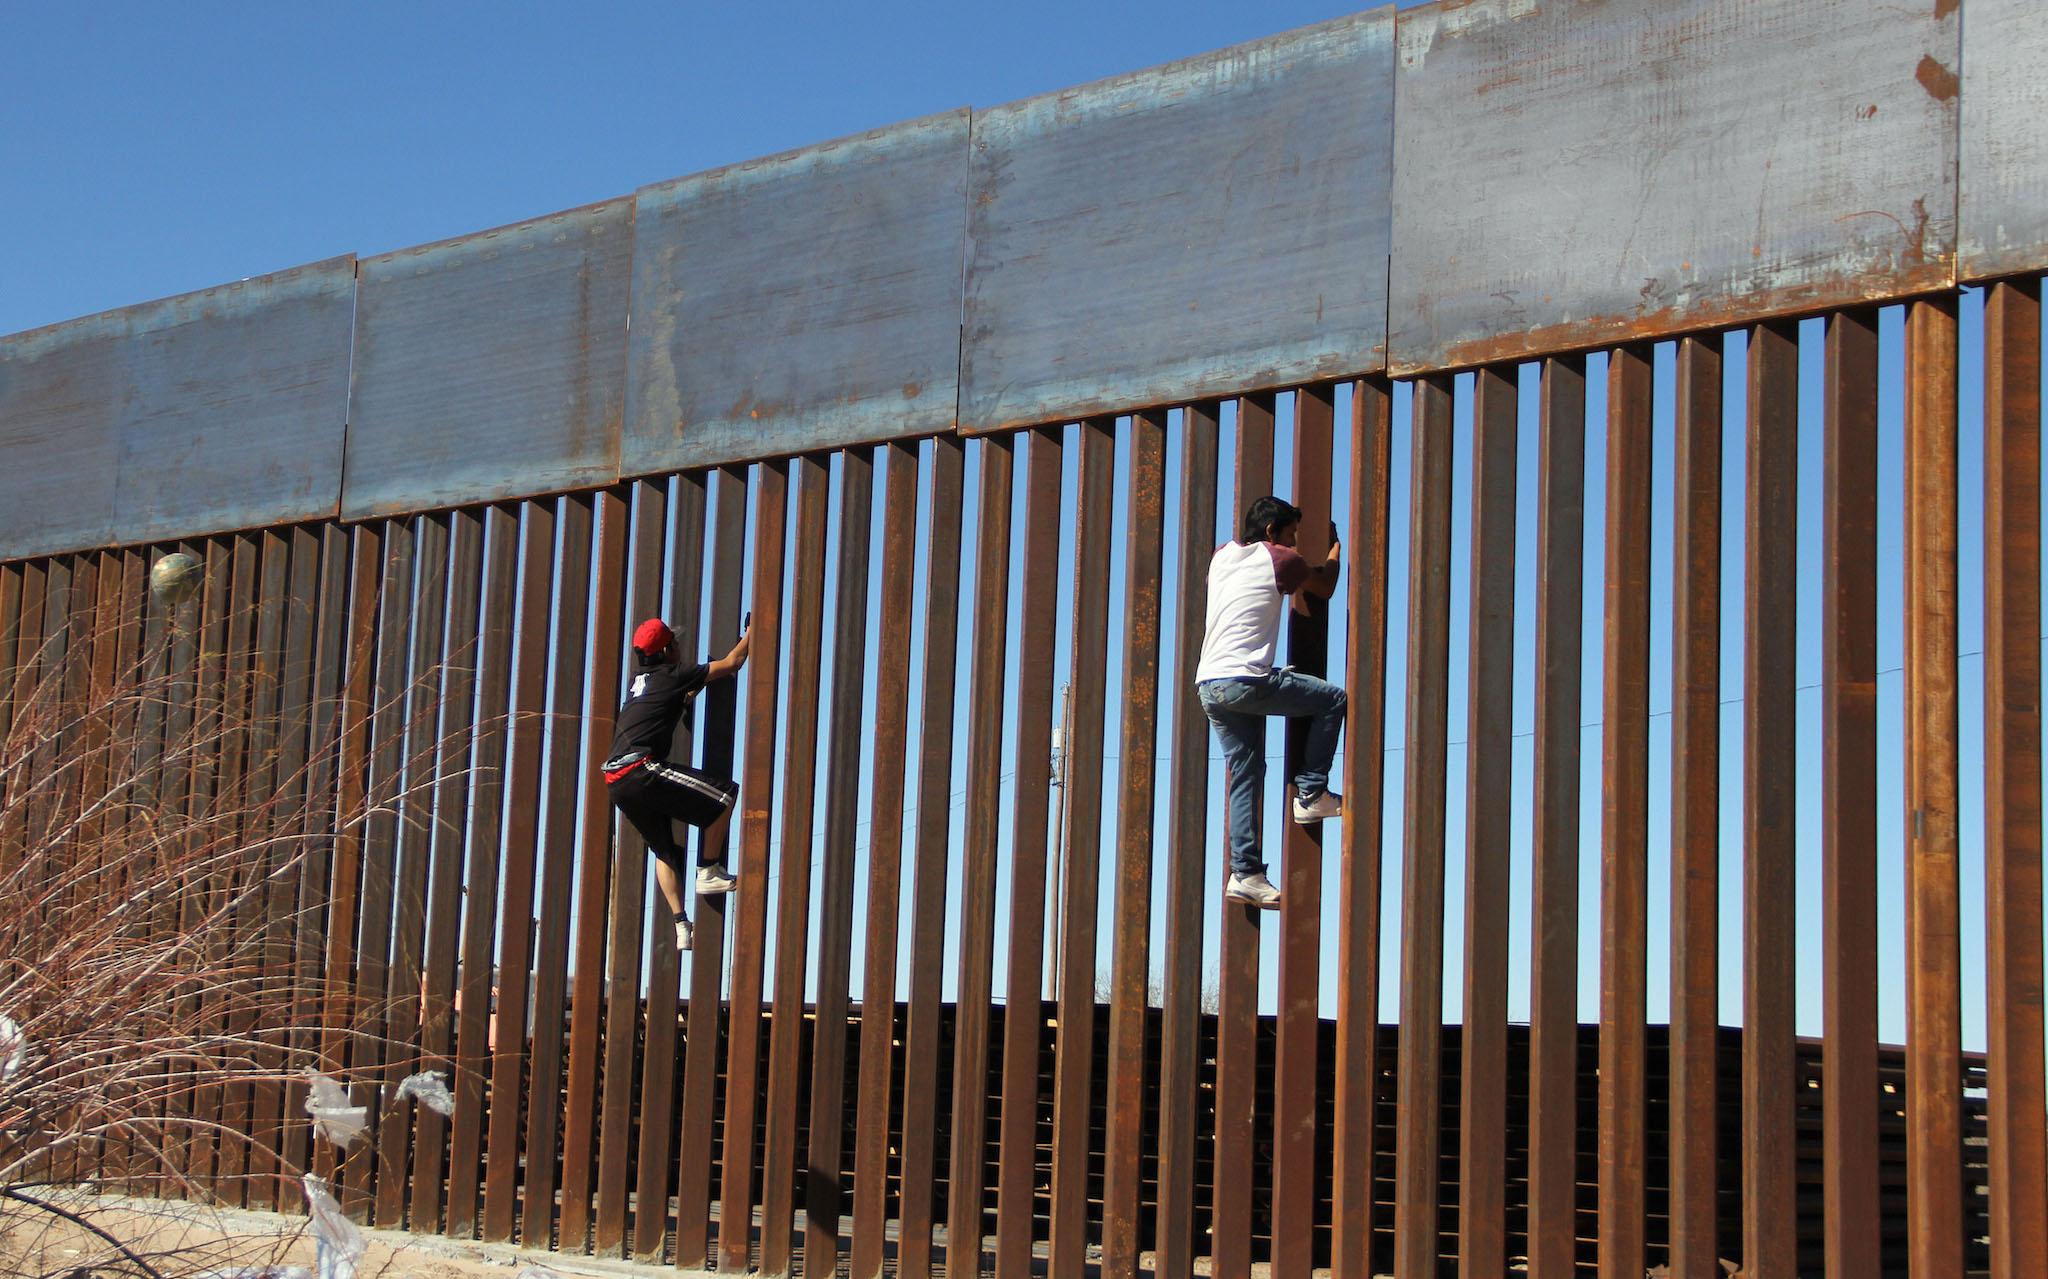 Boys play around, climbing the border division between Mexico and the US in Ciudad Juarez